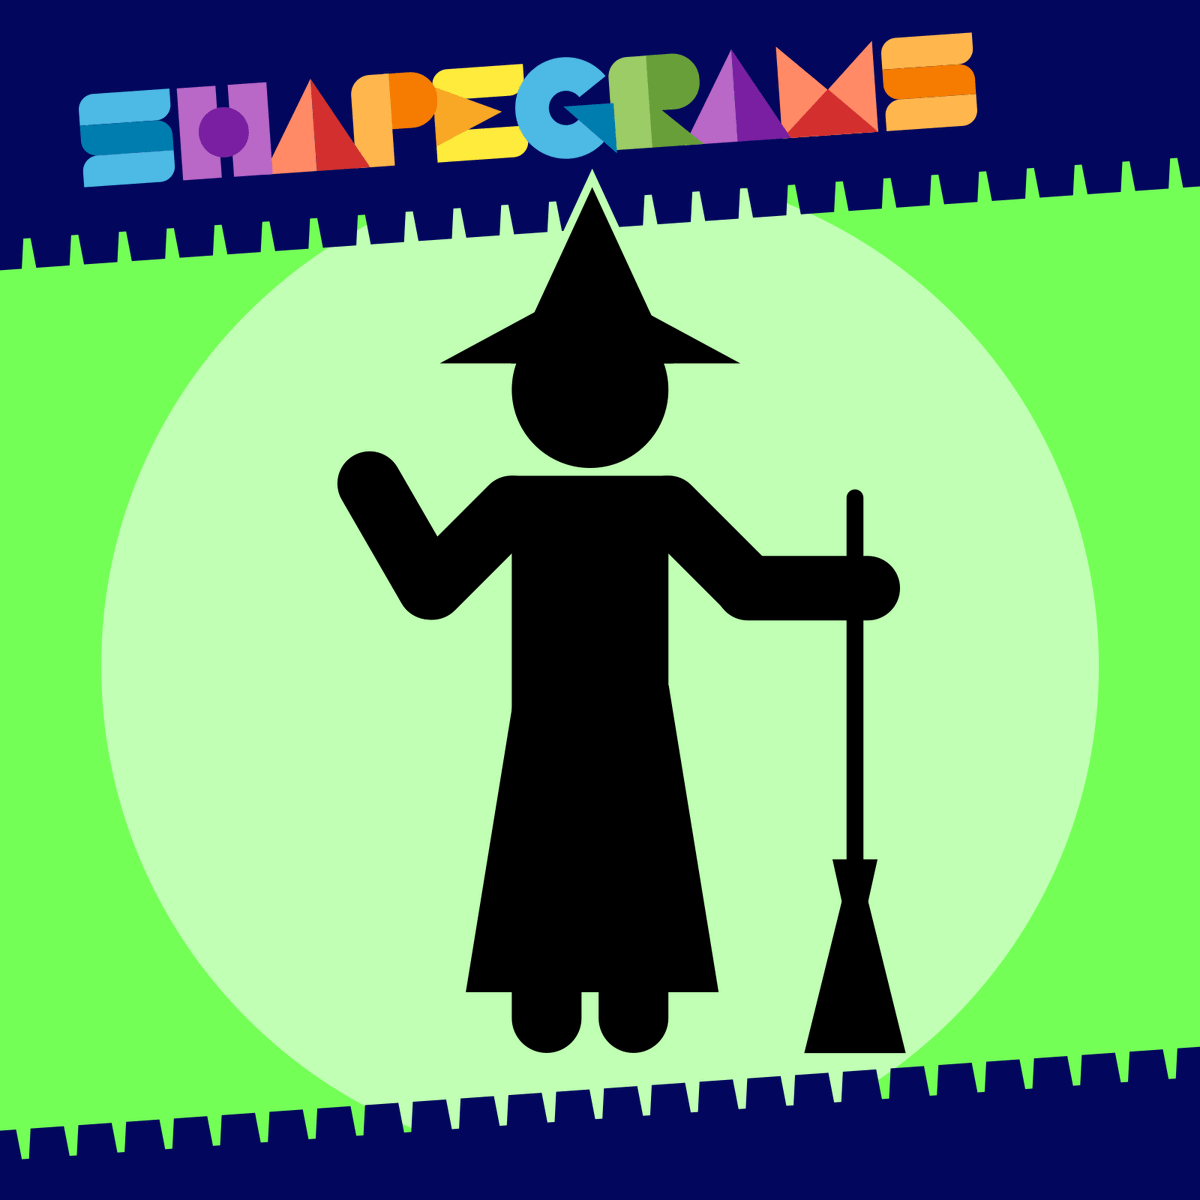 Get SWEPT away by this wickedly drawn Zipper! Recreating the 'Witch Icon' is a SPELLbinding challenge. shapegrams.com/witch #GlobalGEG #GoogleEdu #teachertwitter